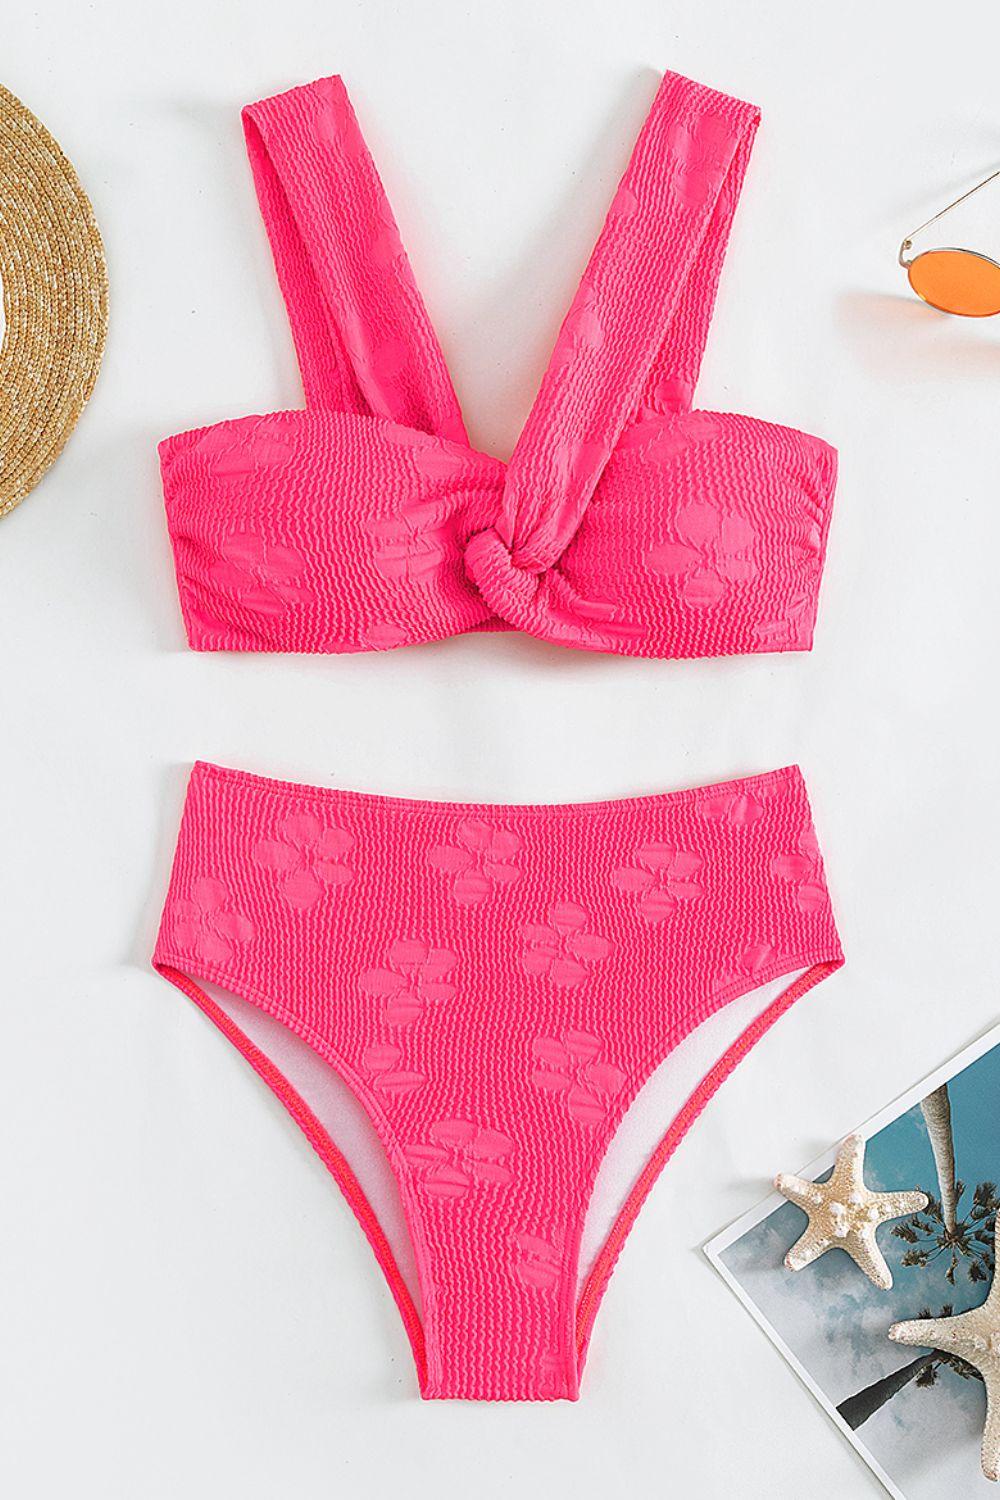 a pink bikinisuit with a bow on the side